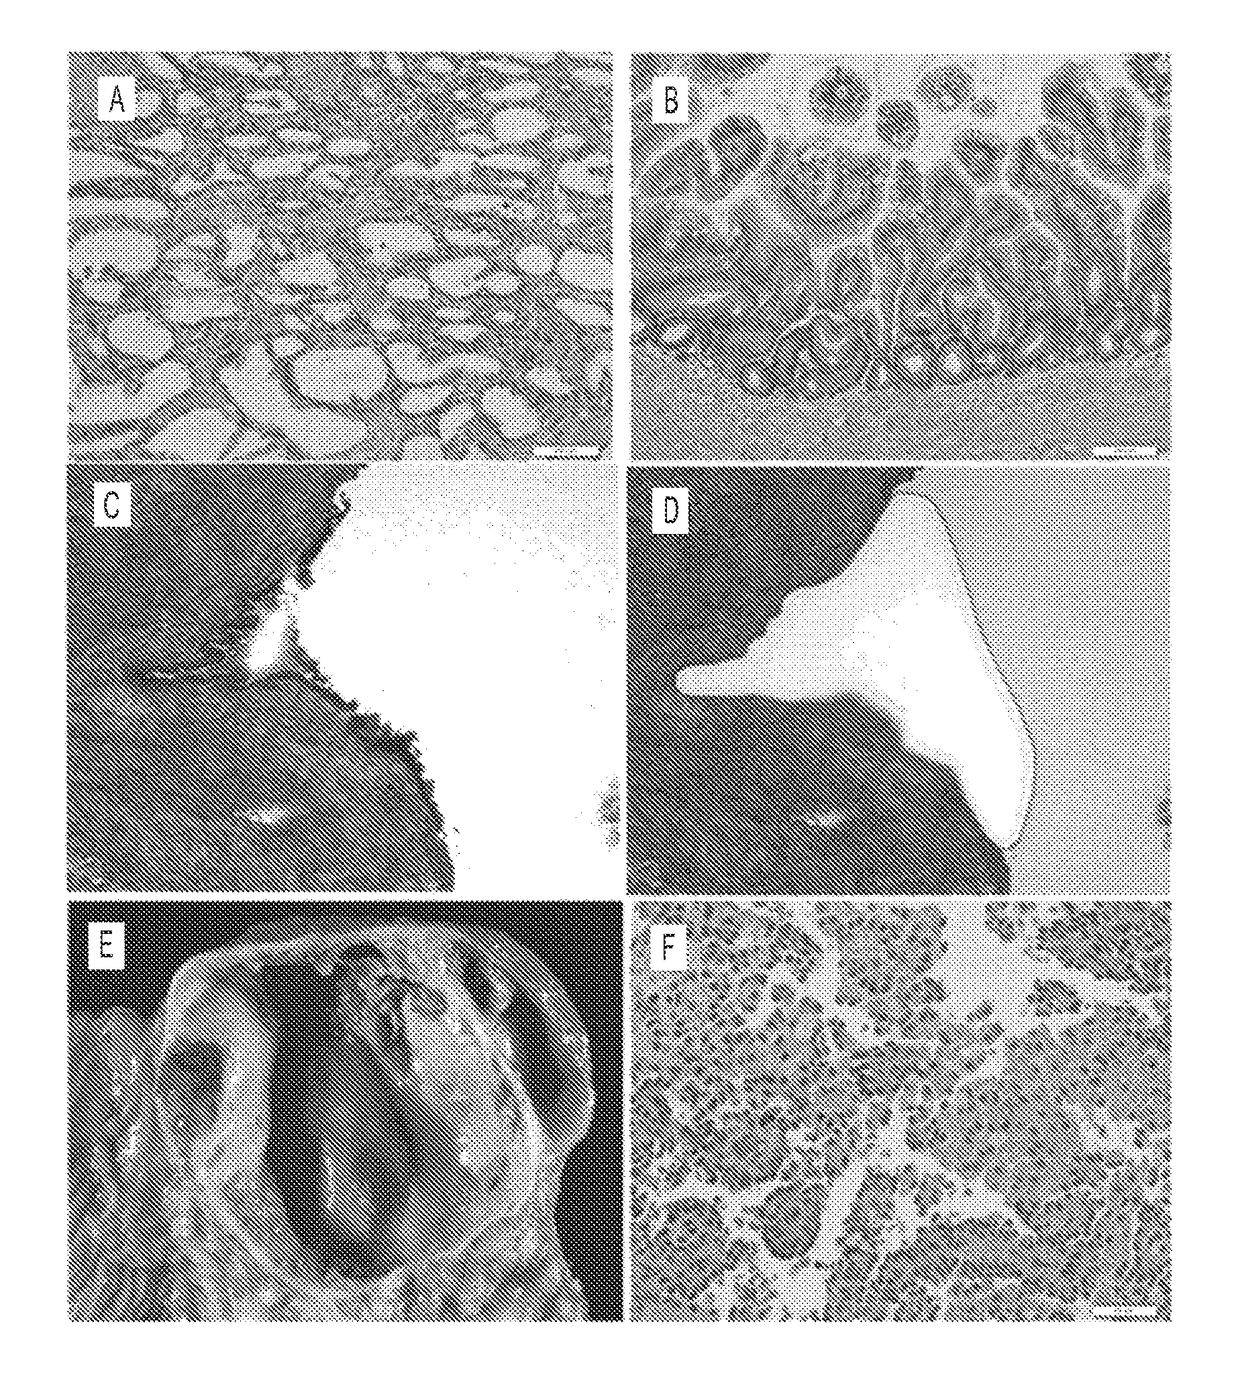 Differential identification of pancreatic cysts